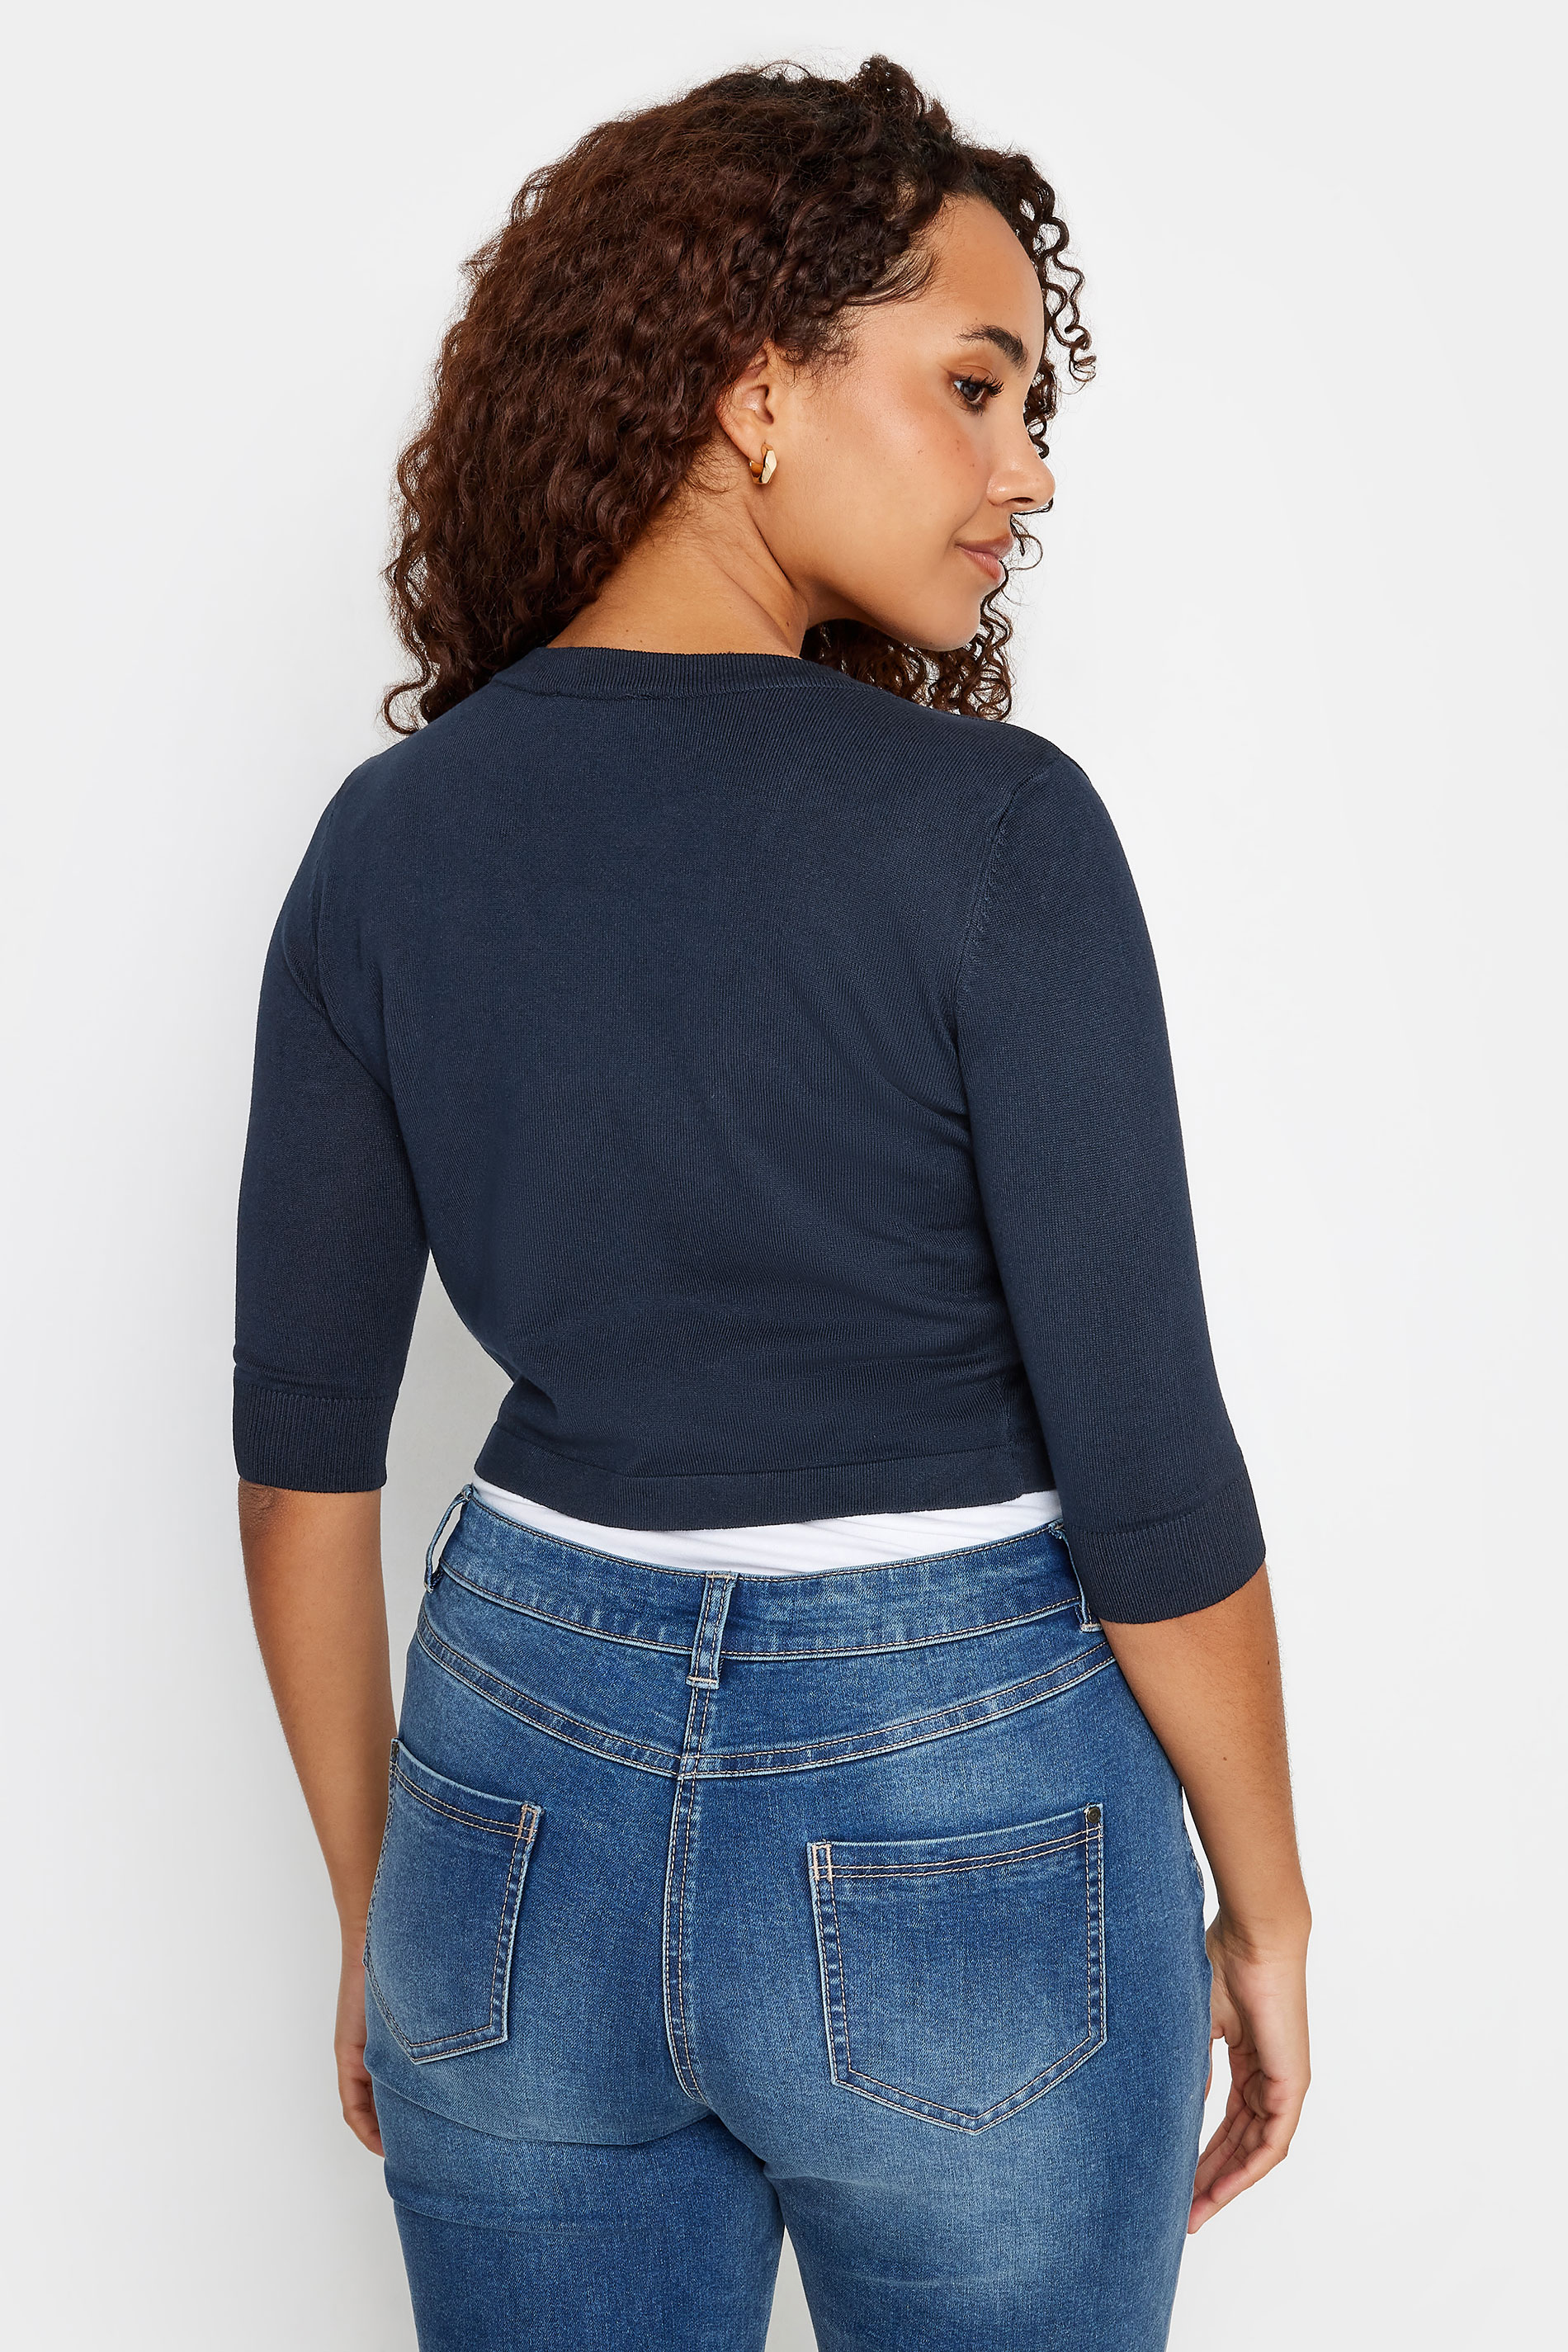 M&Co Navy Blue Cropped Cardigan | M&Co 3